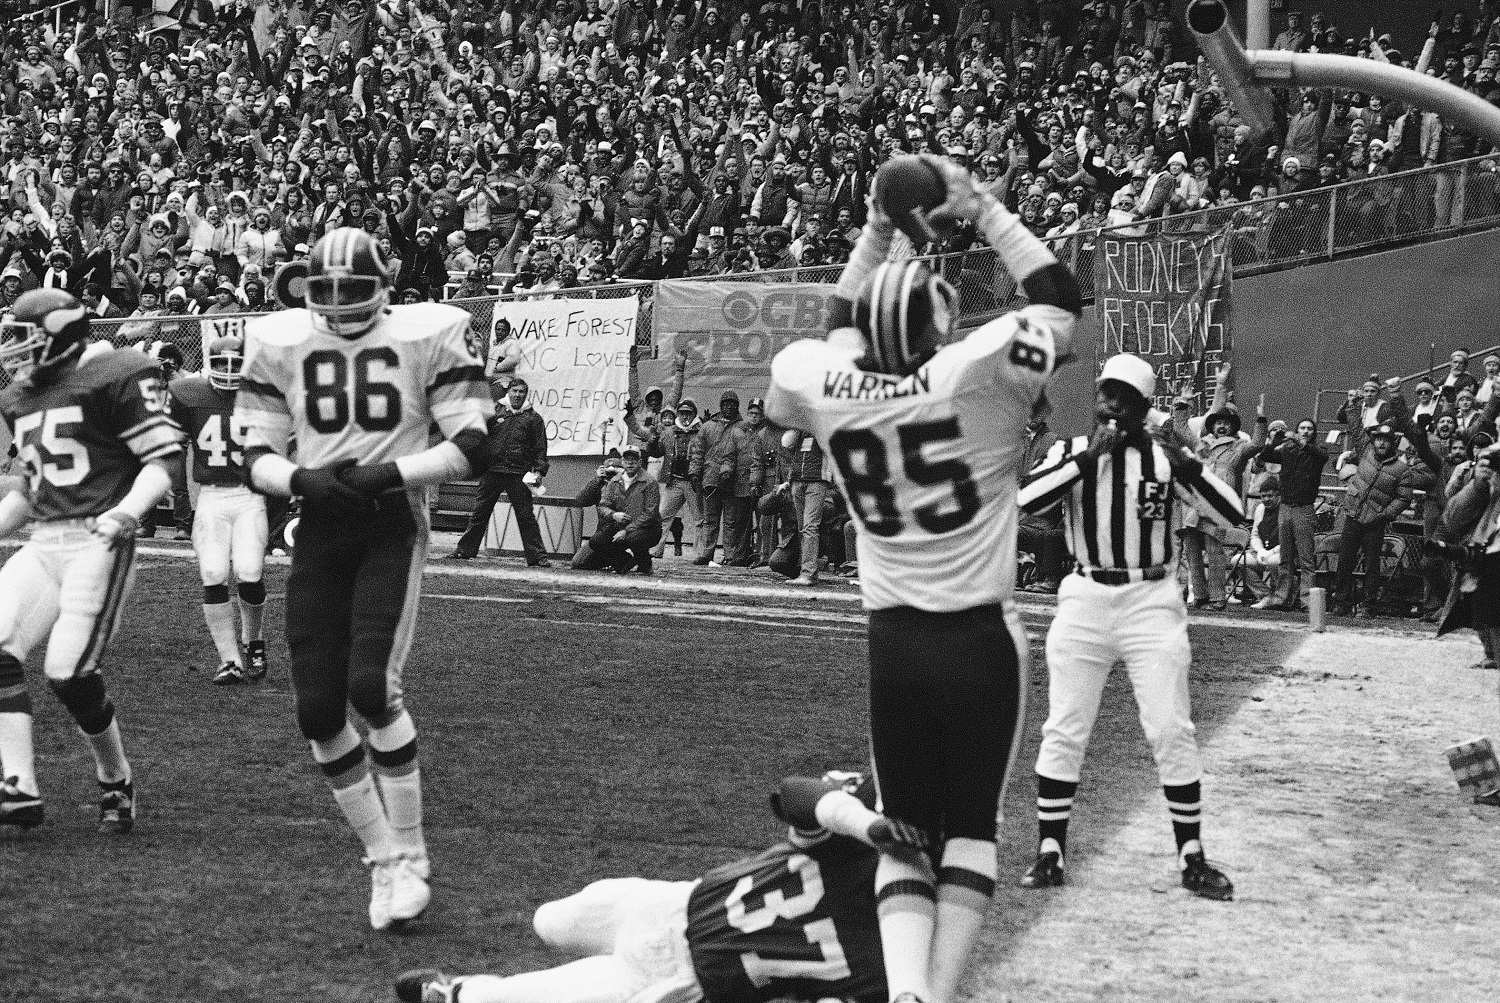 Washington Redskins Don Warren (85) grabs a pass thrown by Joe Theismann in the end zone to score the first touchdown against the Minnesota Vikings after just 5:57 of the first quarter in NFC playoff action at RFK Stadium, Jan. 15, 1983 in Washington. Willie Teal on the Vikings is on the ground. (AP Photo/Charles Tasnadi)